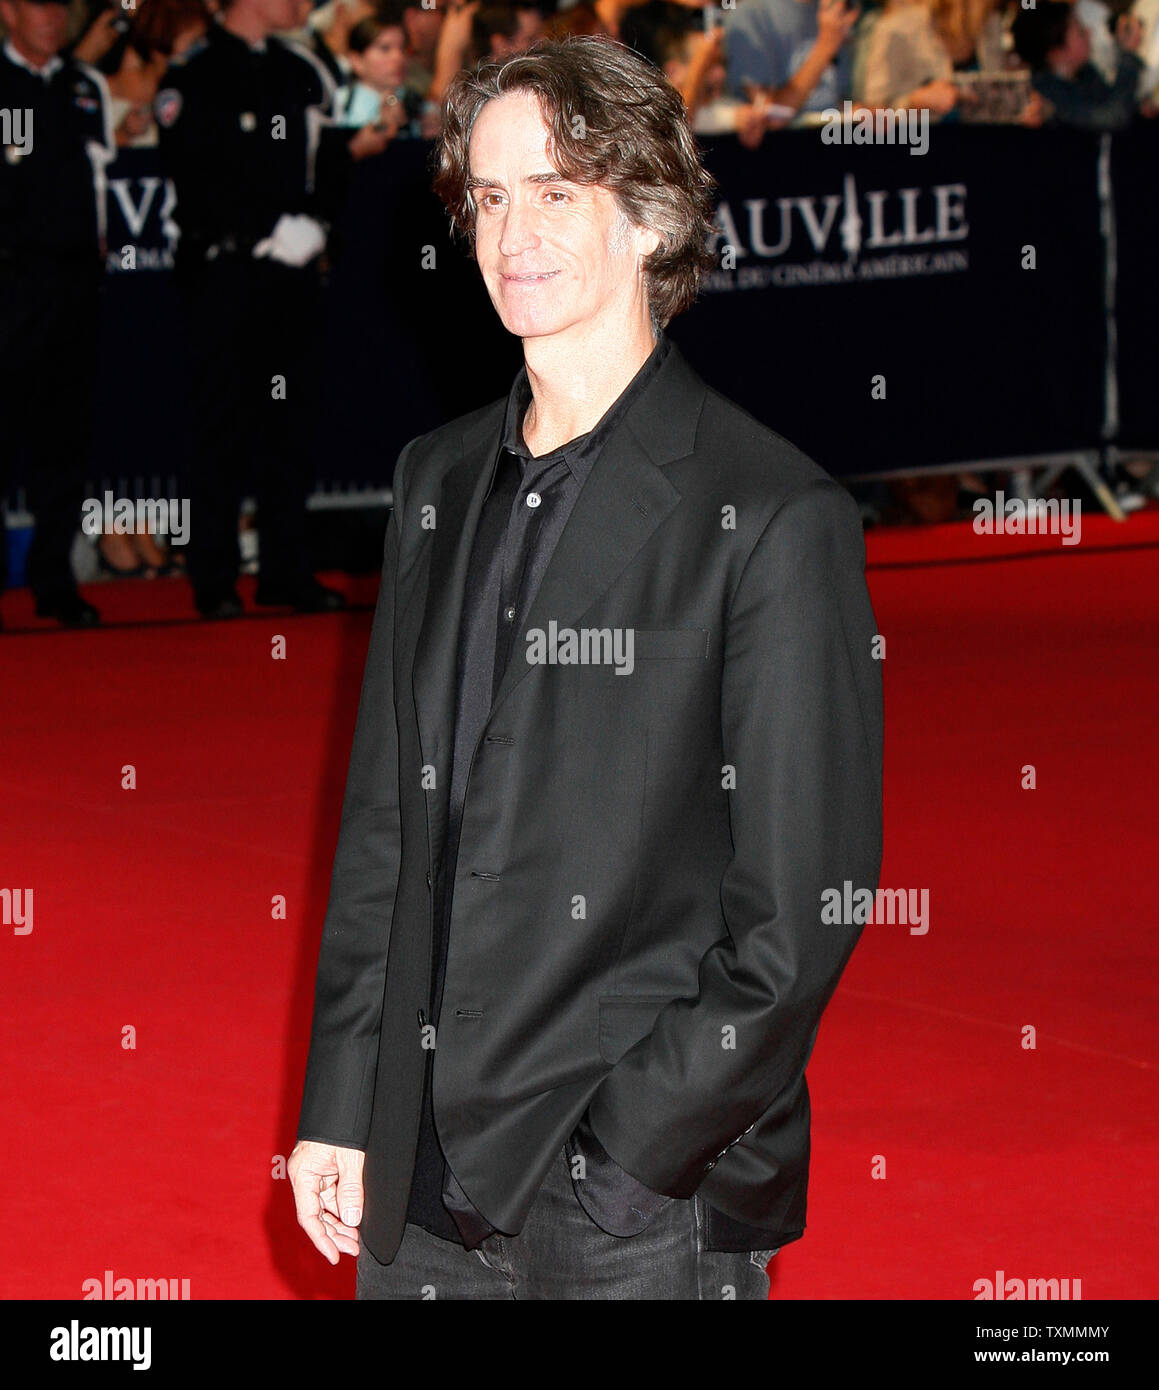 Director Jay Roach arrives on the red carpet before a screening of the HBO movie 'Recount' during the 34th American Film Festival of Deauville in Deauville, France on September 8, 2008.    (UPI Photo/David Silpa) Stock Photo